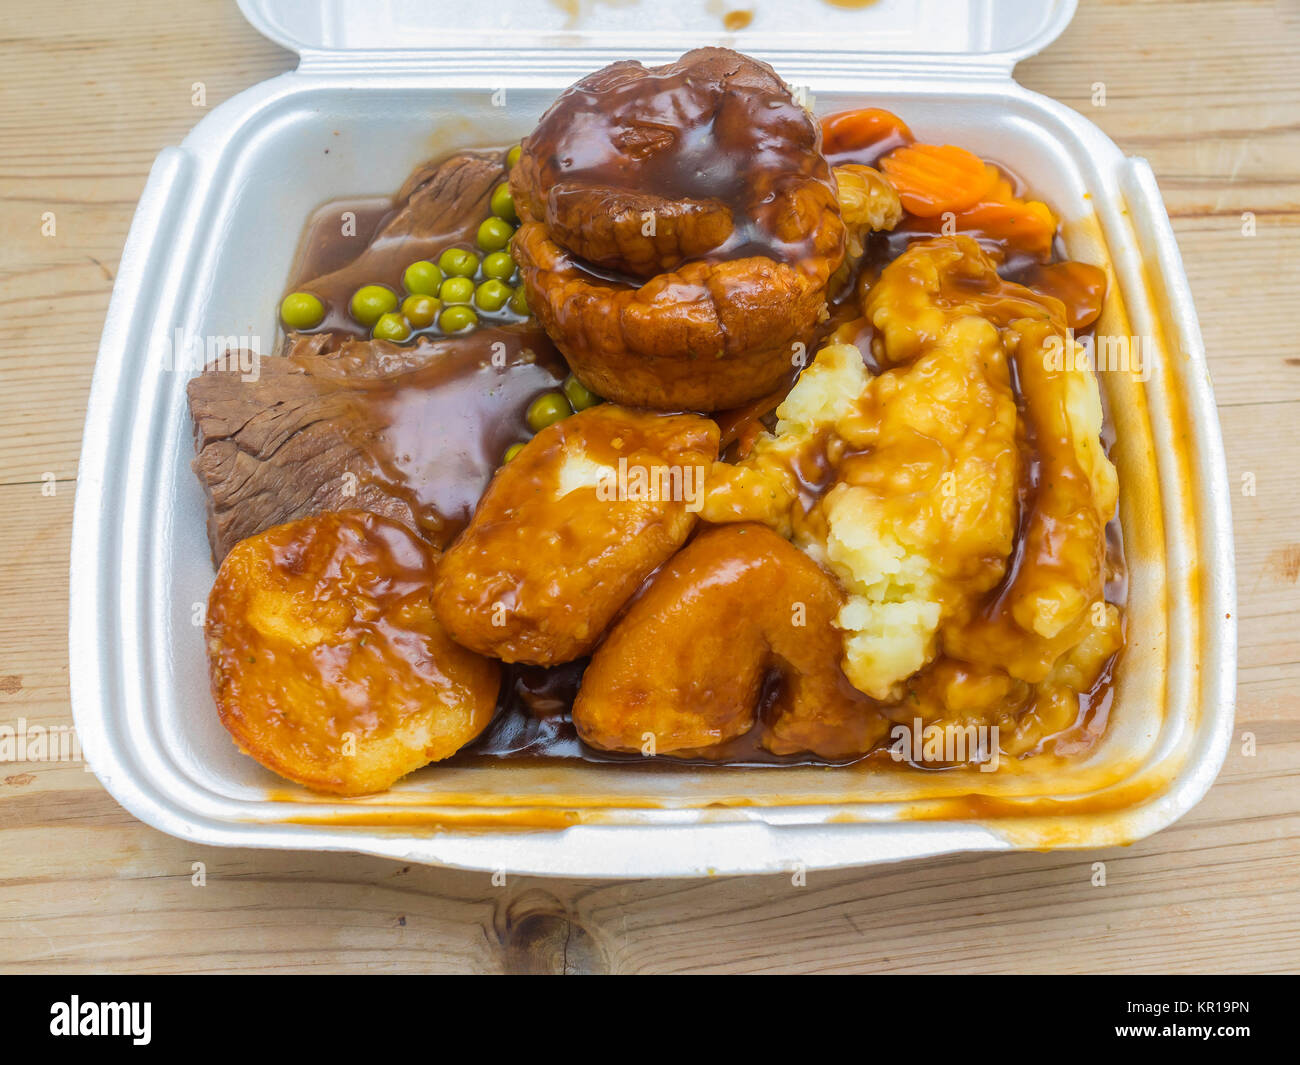 Take away Sunday Lunch from a craft butcher's shop with Roast Beef, Yorkshire Pudding, carrots, peas mashed and roast potatoes and gravy Stock Photo